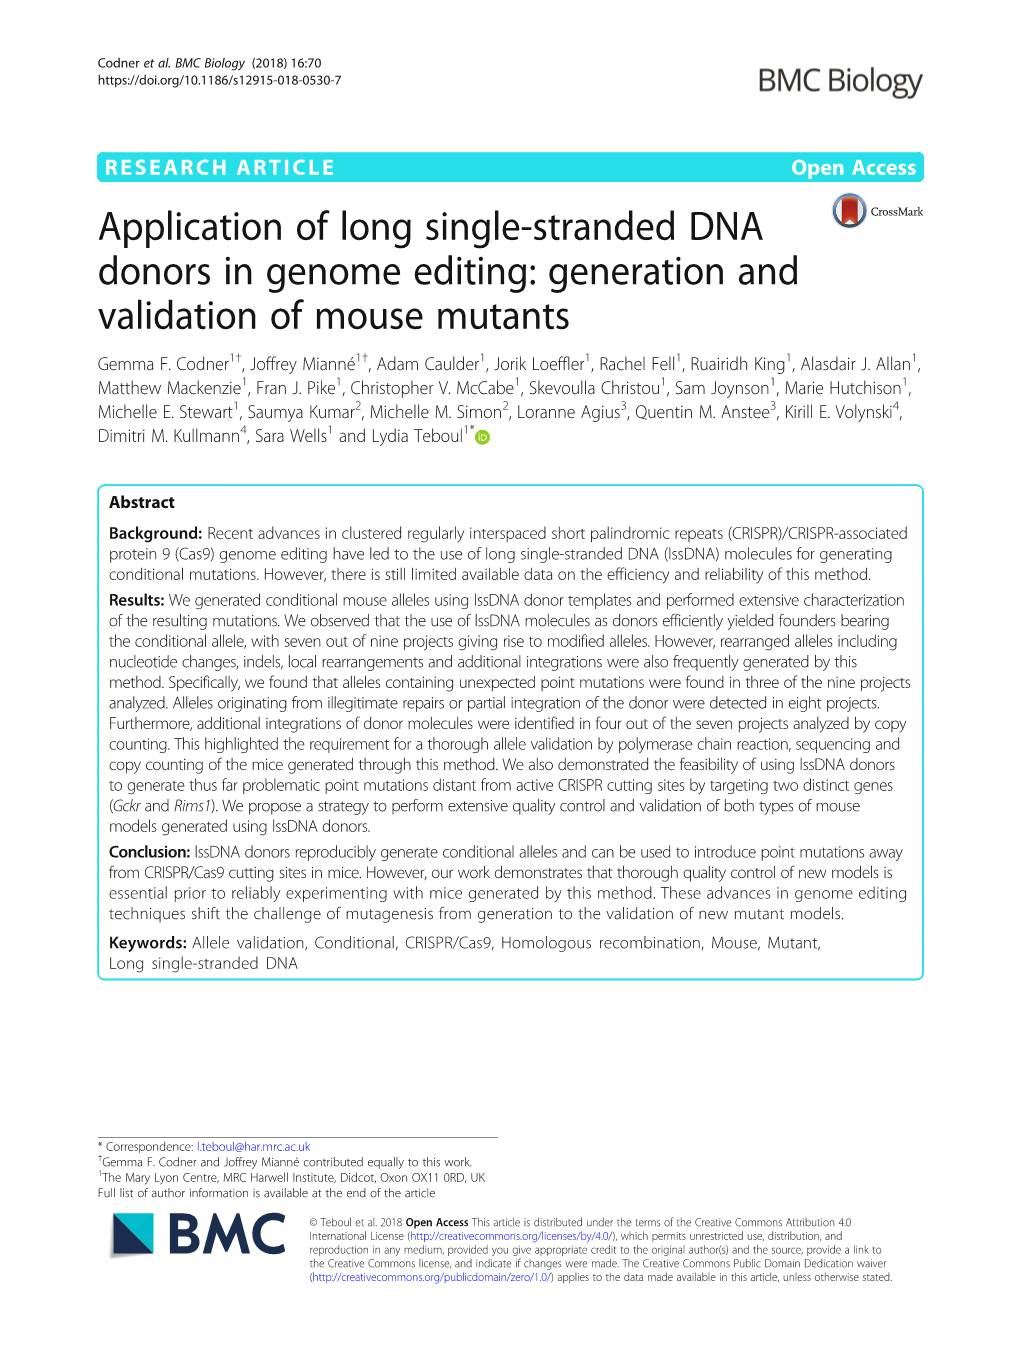 Application of Long Single-Stranded DNA Donors in Genome Editing: Generation and Validation of Mouse Mutants Gemma F